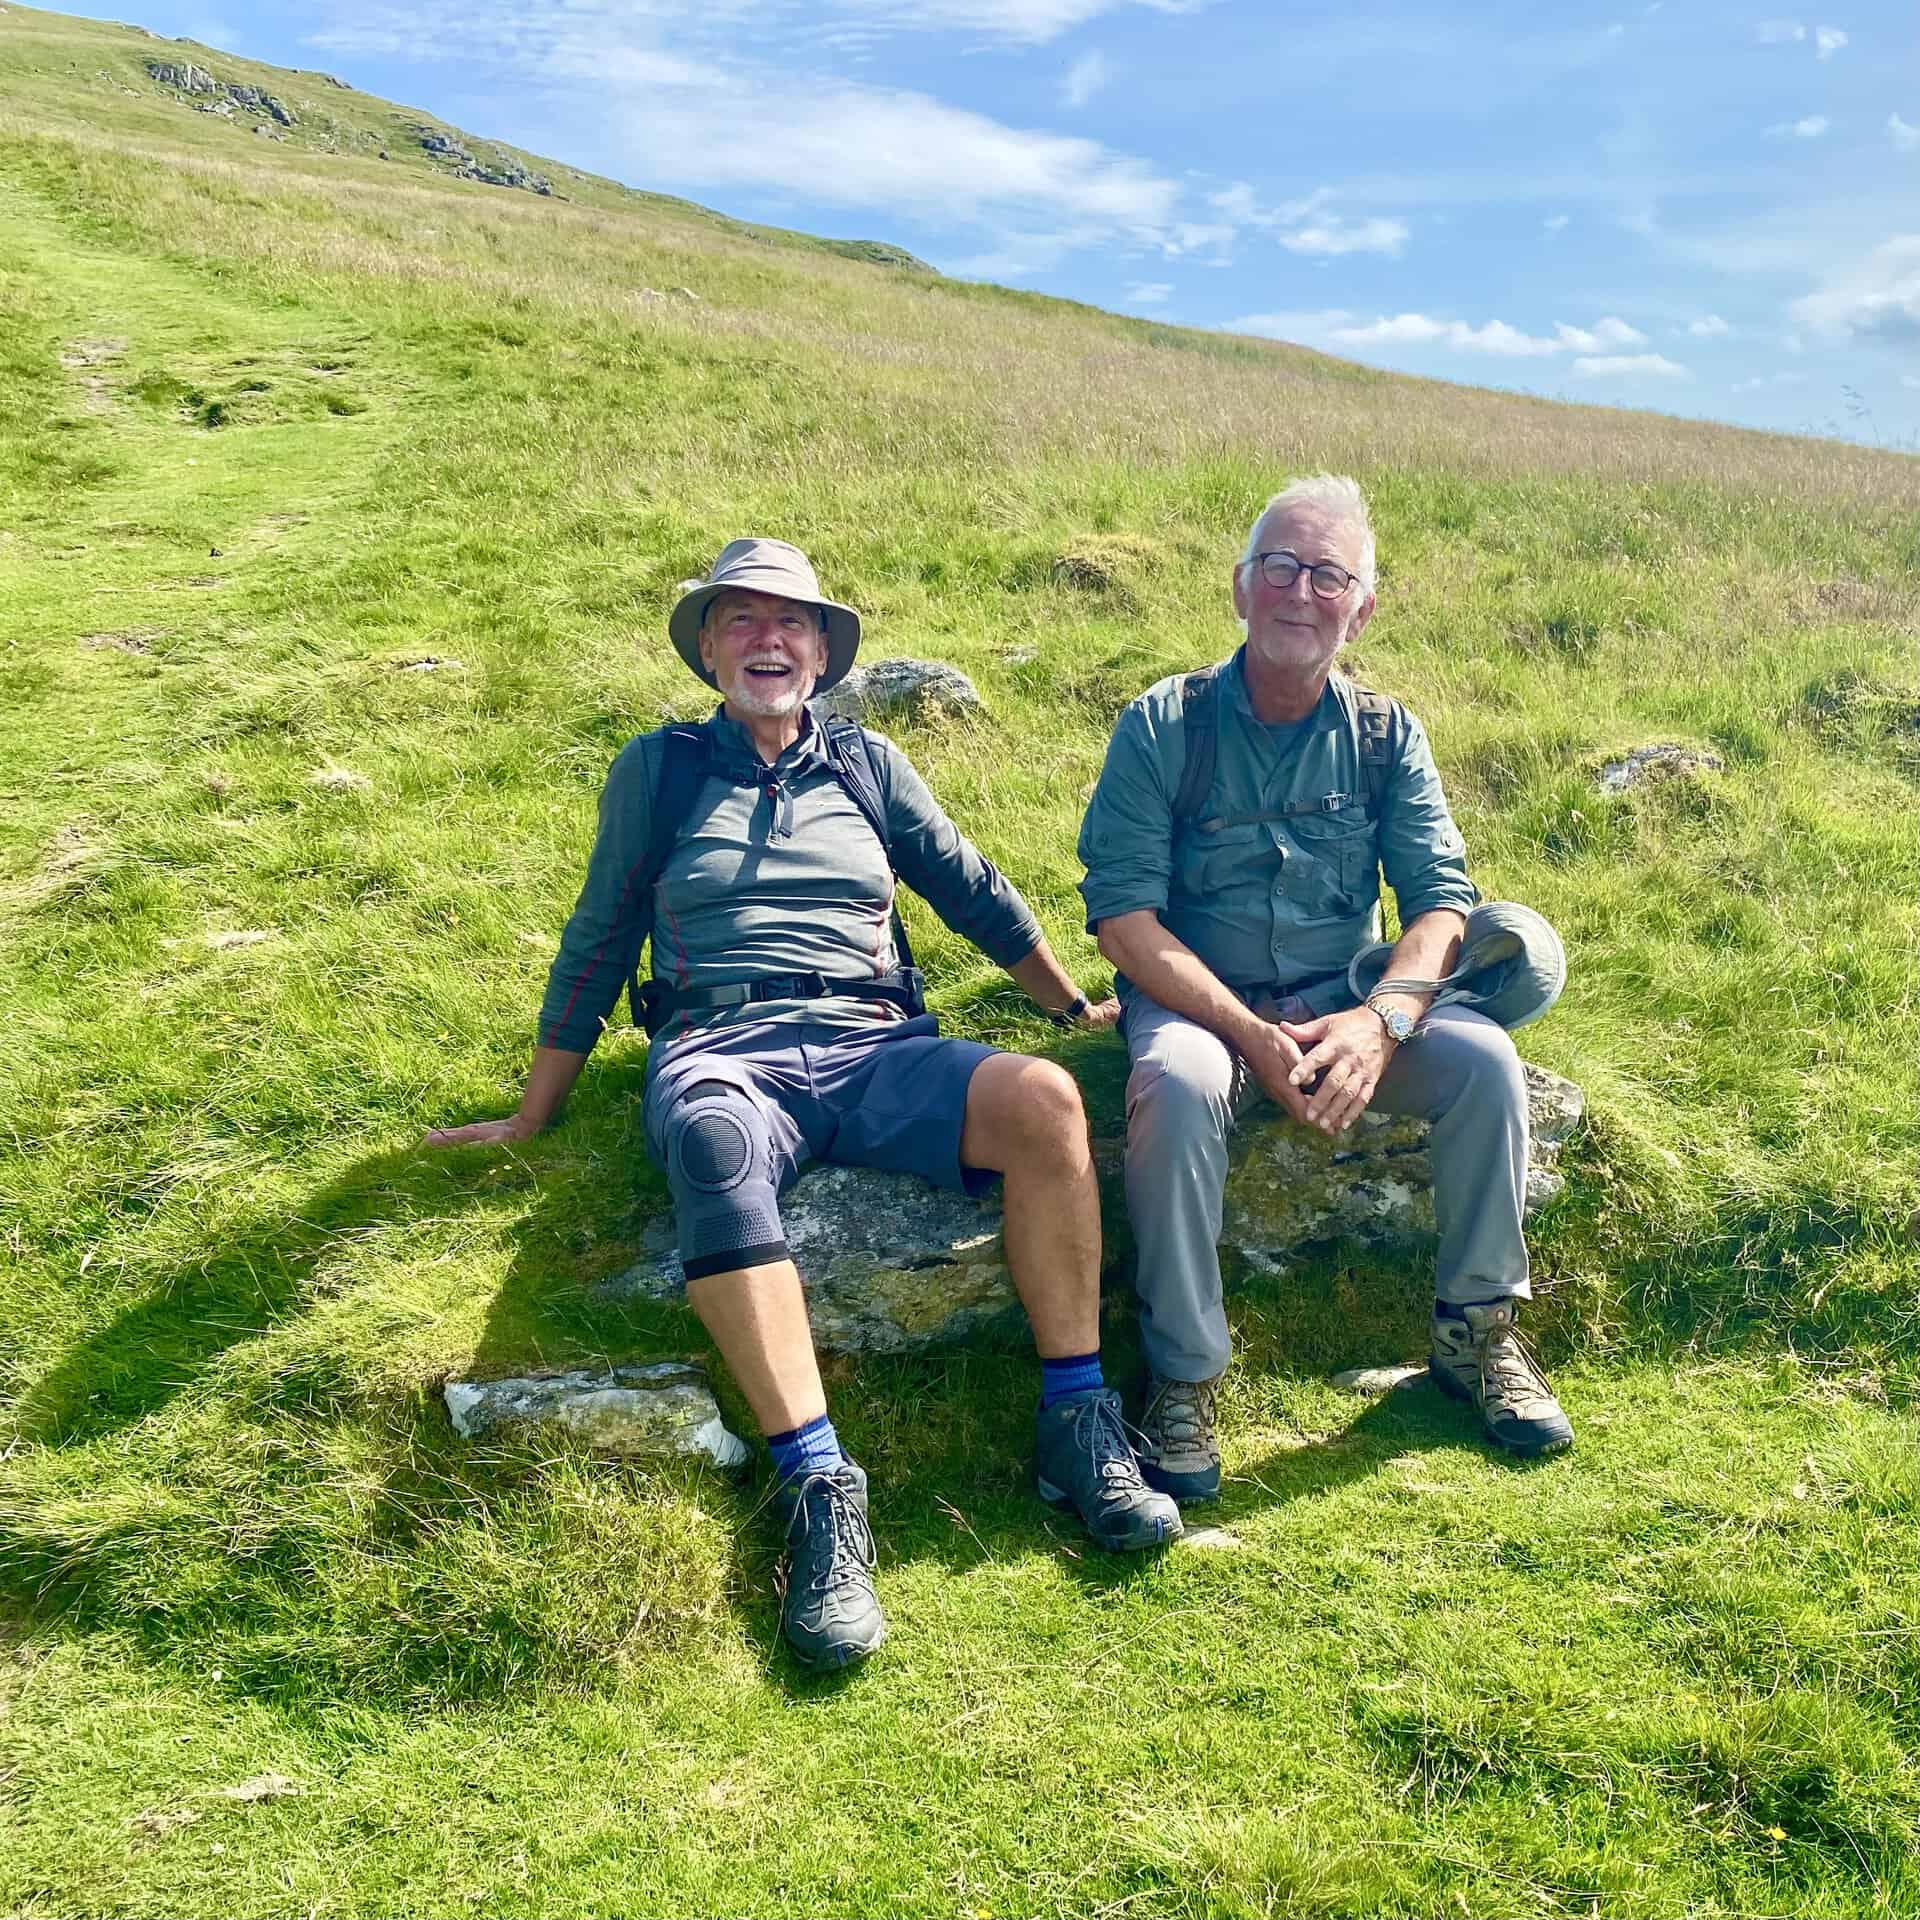 Mike and Keith have a rest on the steep, grassy slopes just east of Stanah.